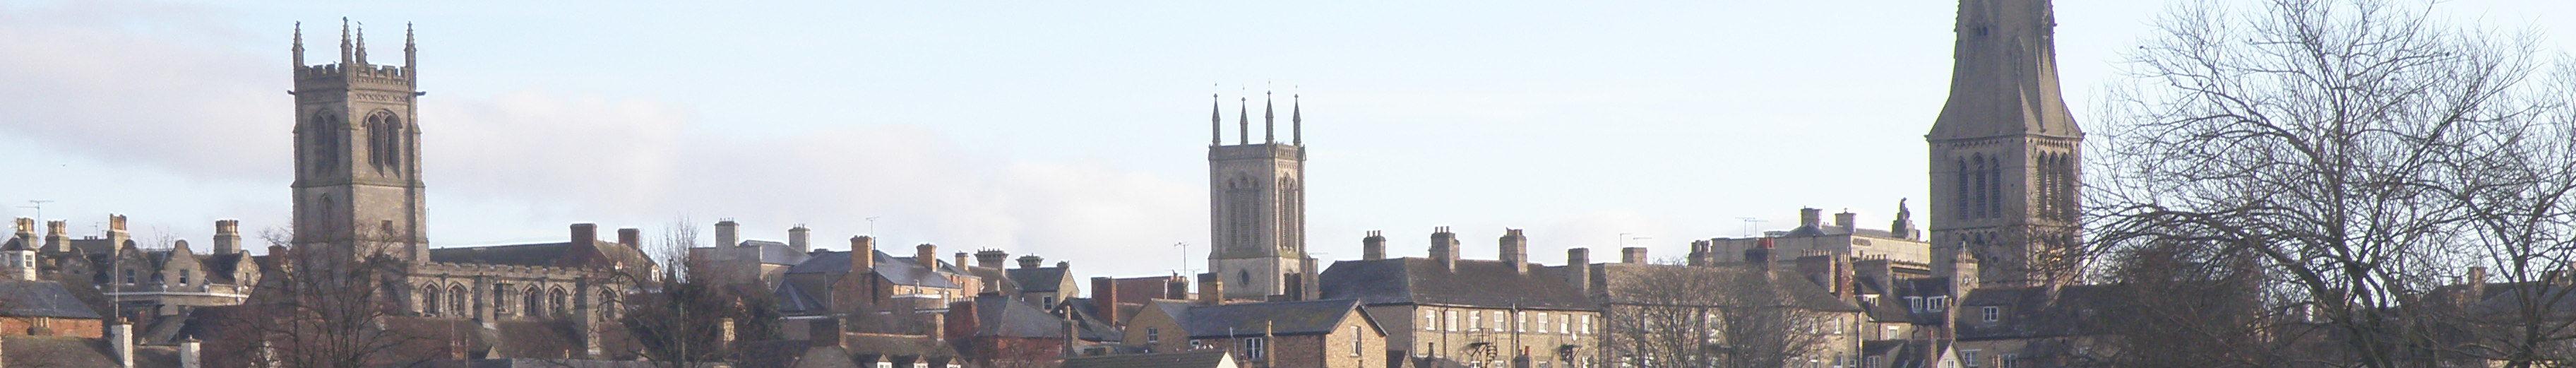 Banner image for Stamford on GigsGuide